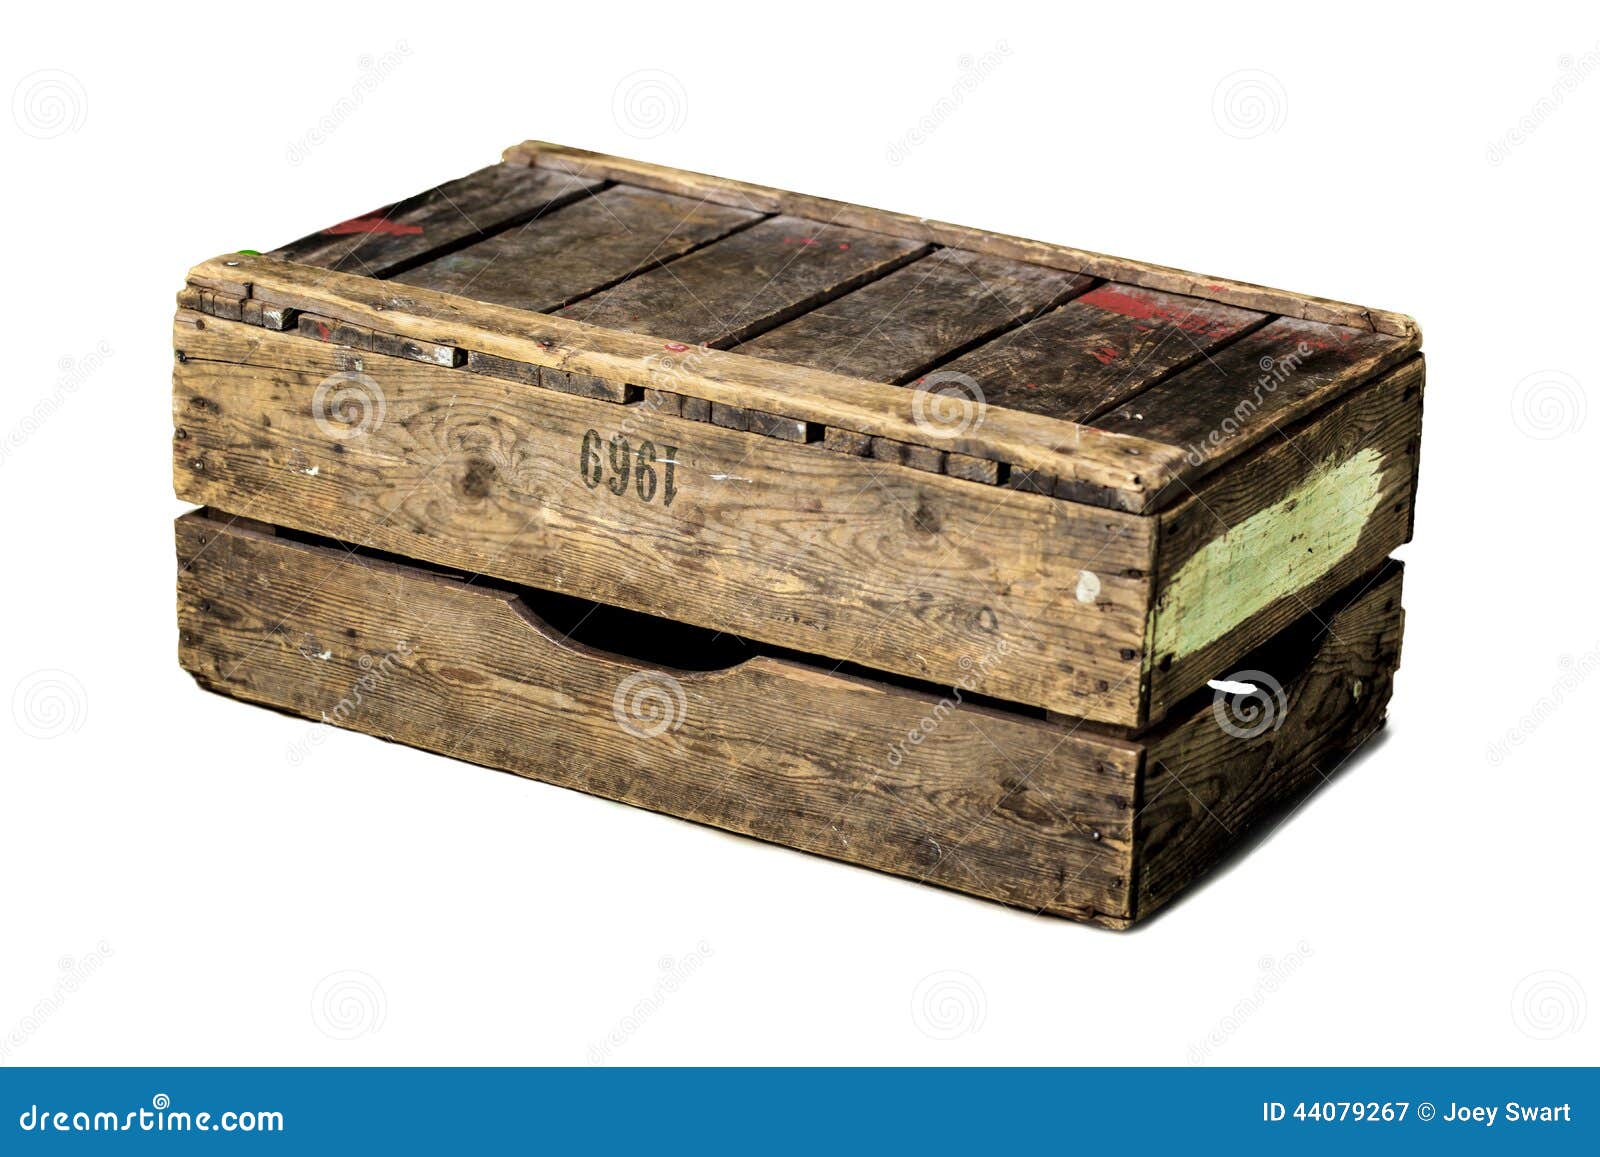 wooden crate.